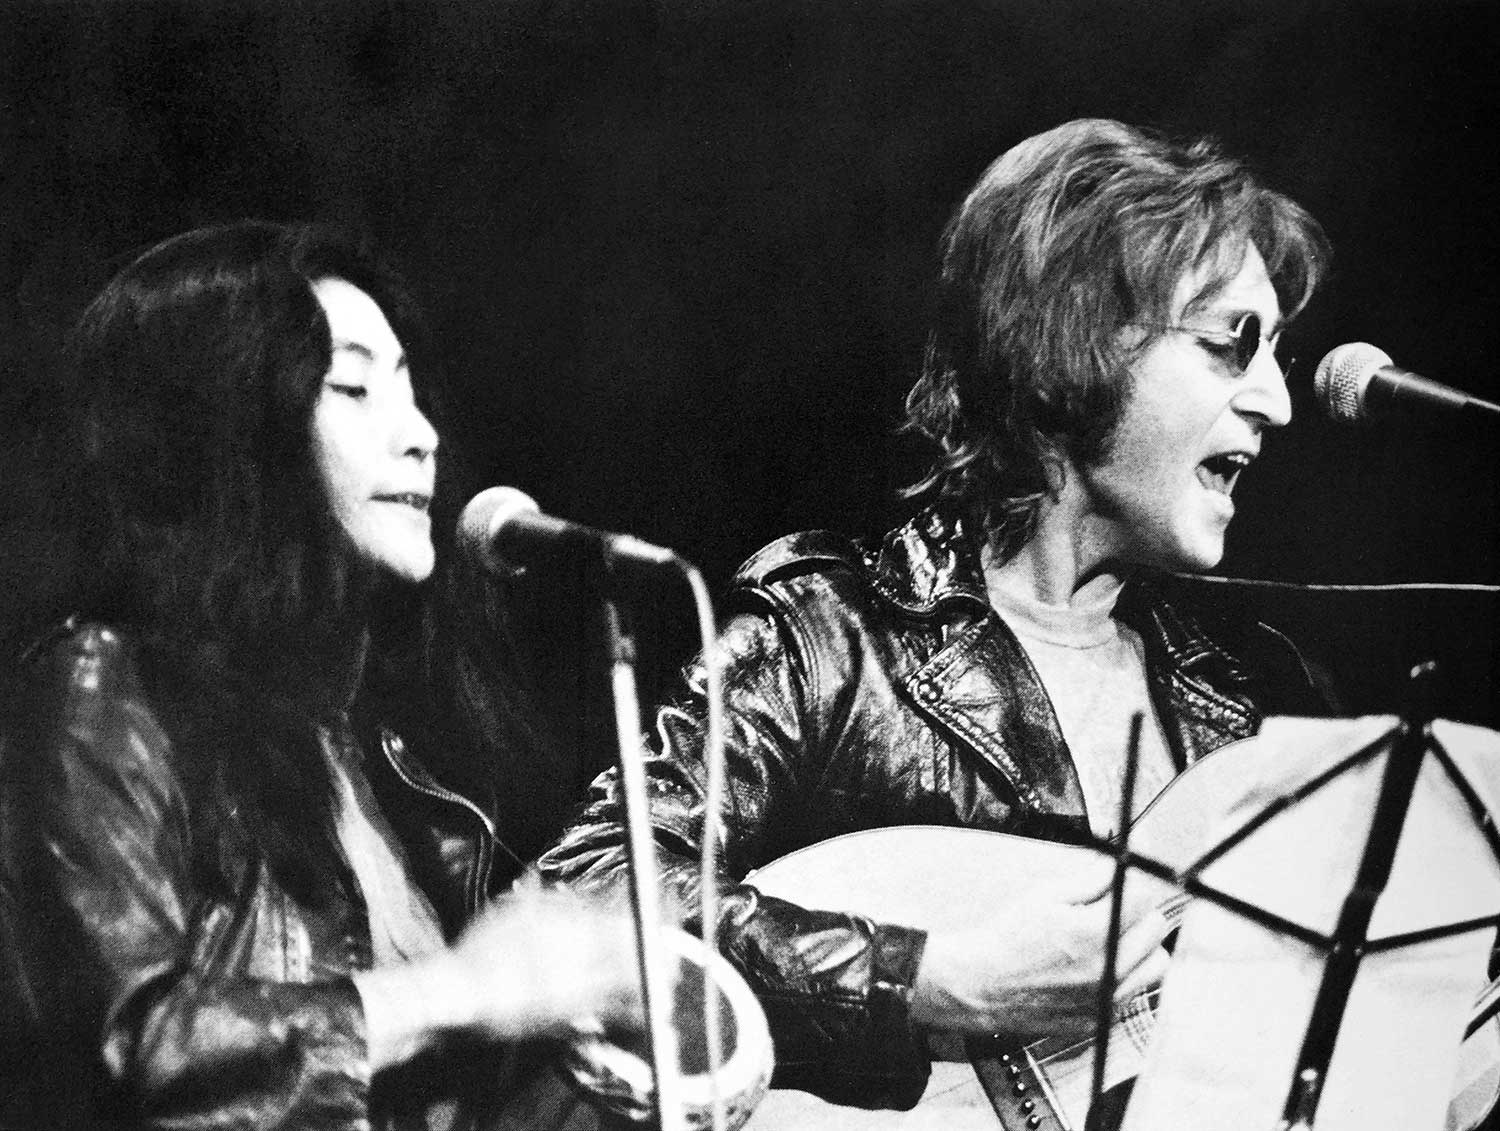 Lennon and Yoko Ono performing at the John Sinclair Freedom Rally in 1971